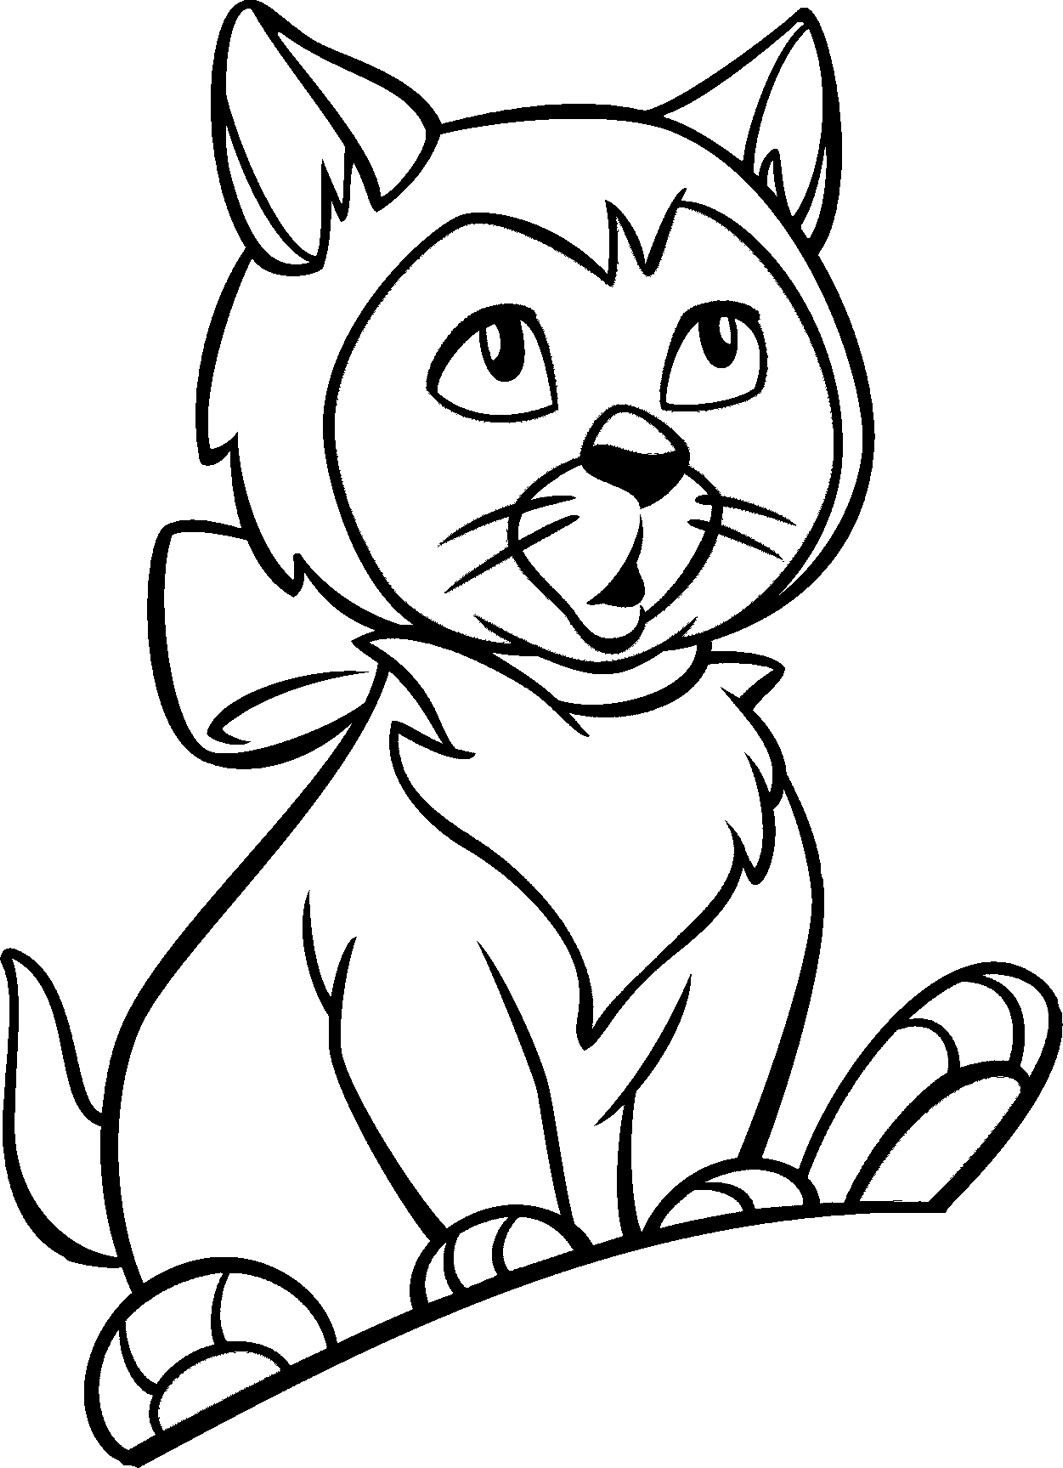 Coloring Pages For Toddlers
 Coloring Pages for Kids Cat Coloring Pages for Kids